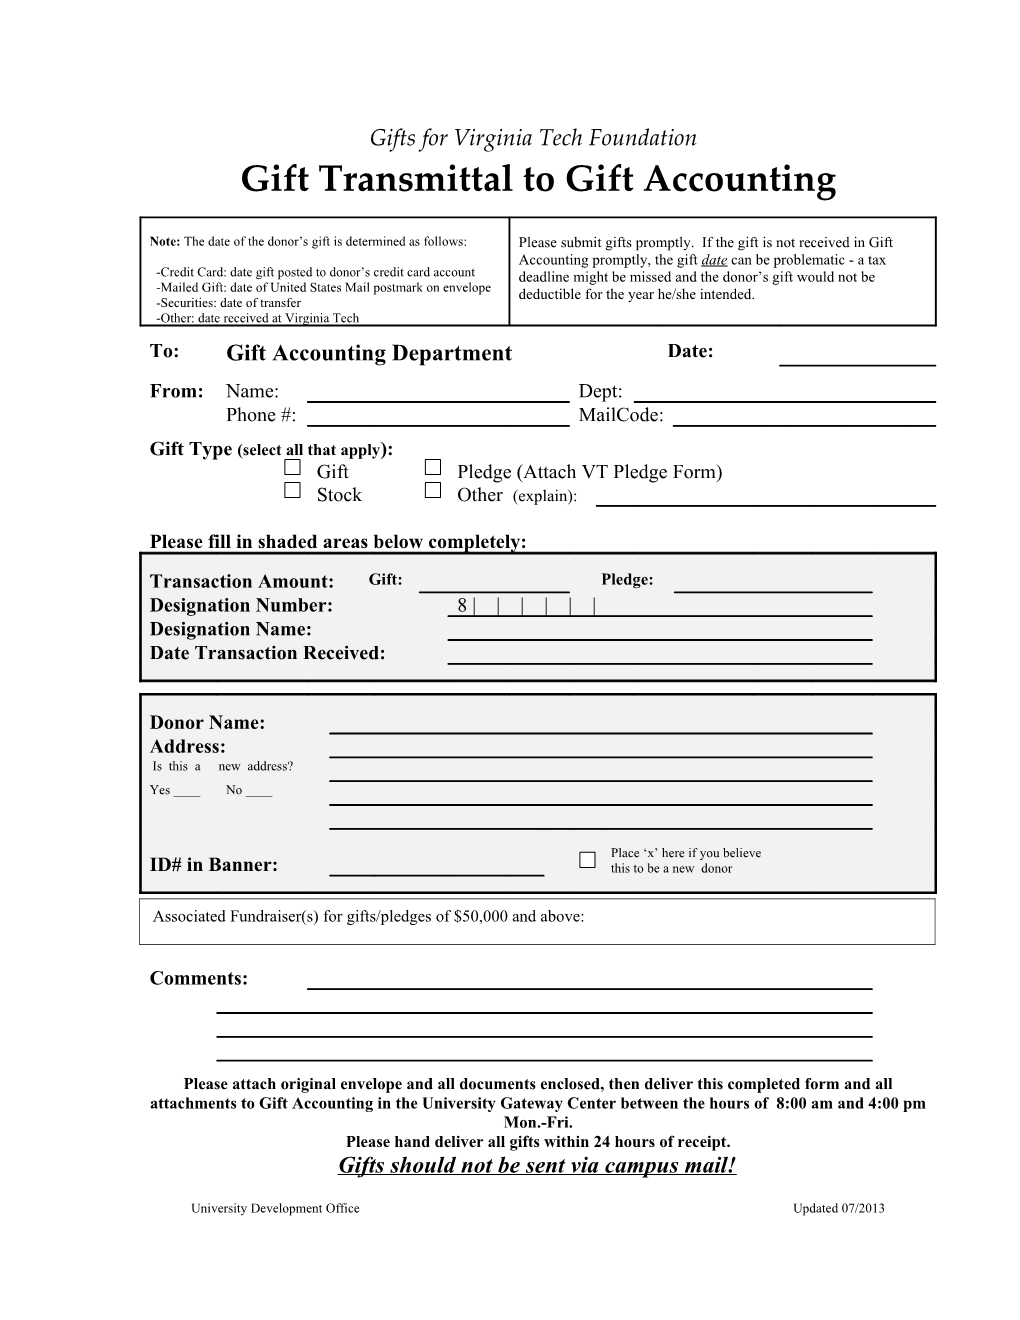 Gift Transmittal To Gift Accounting